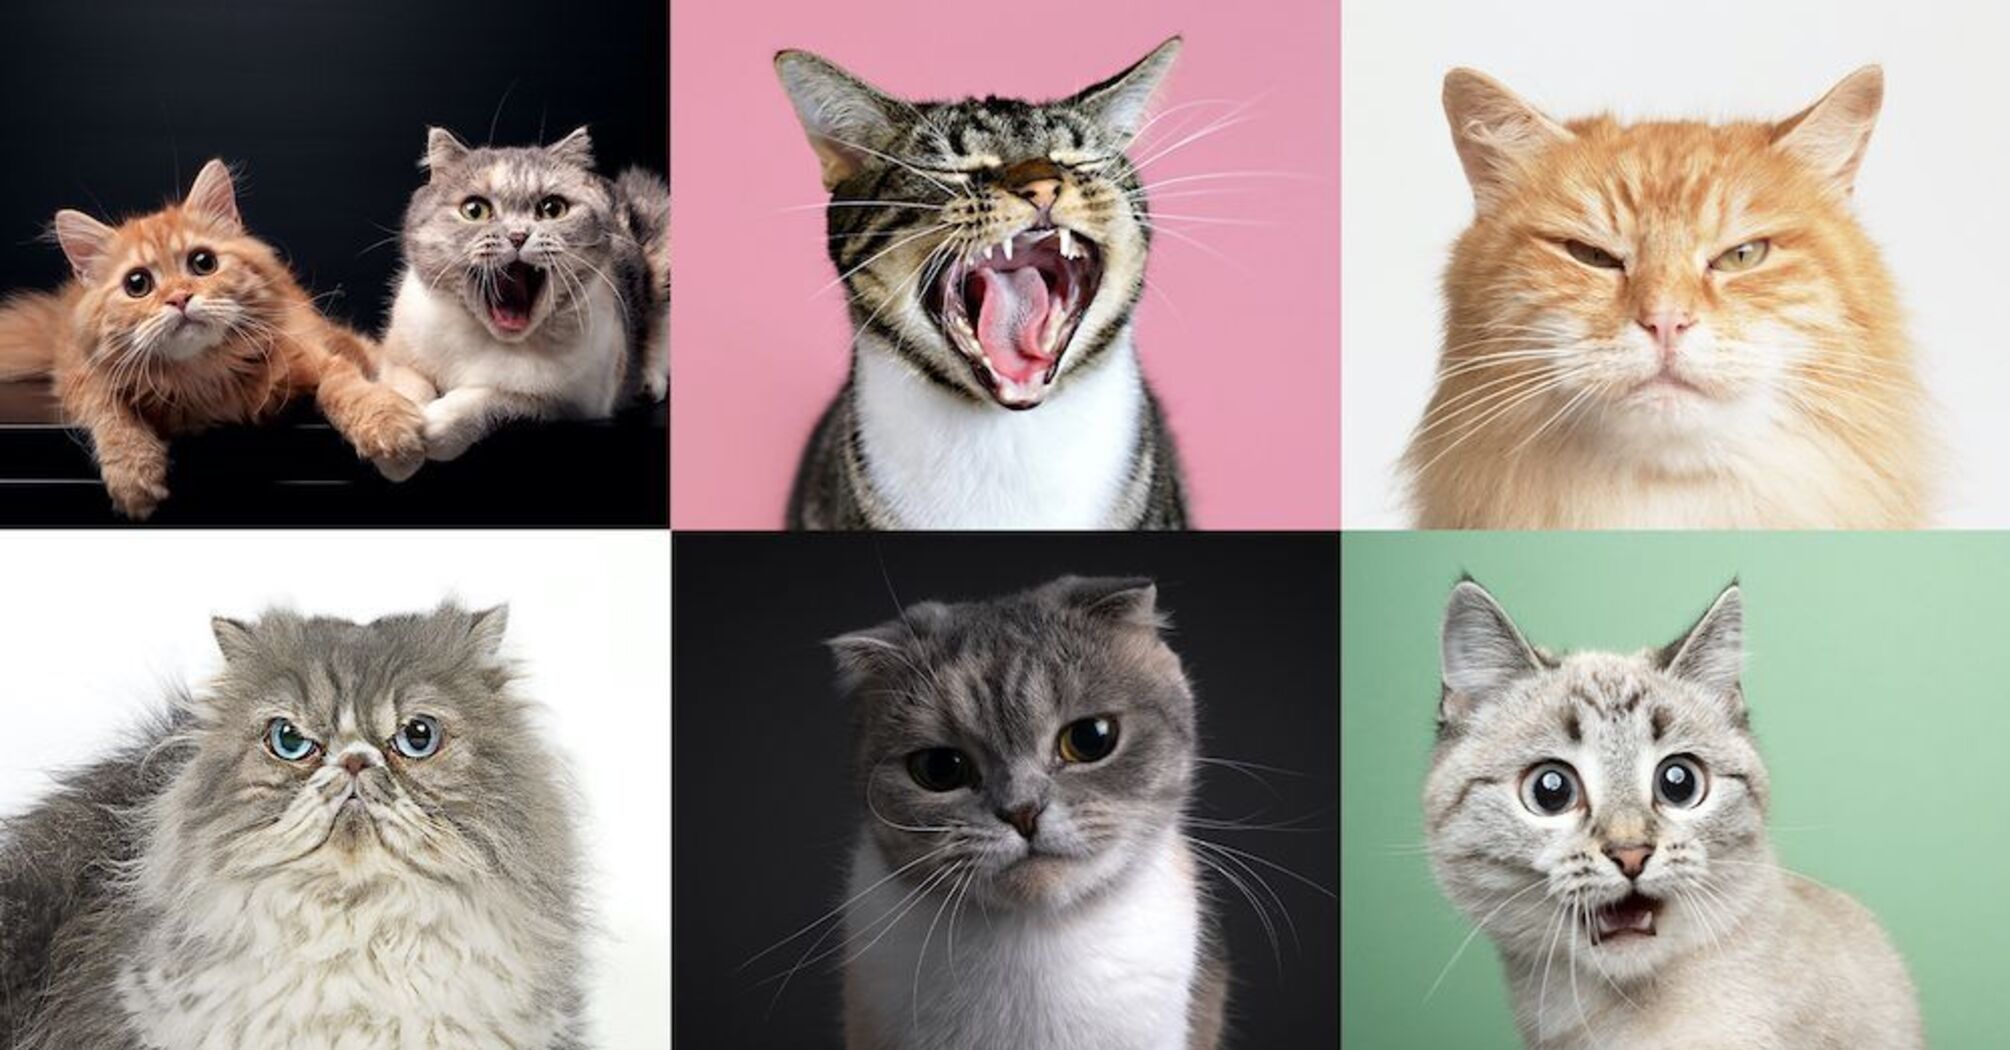 Scientists have counted hundreds of facial expressions in cats